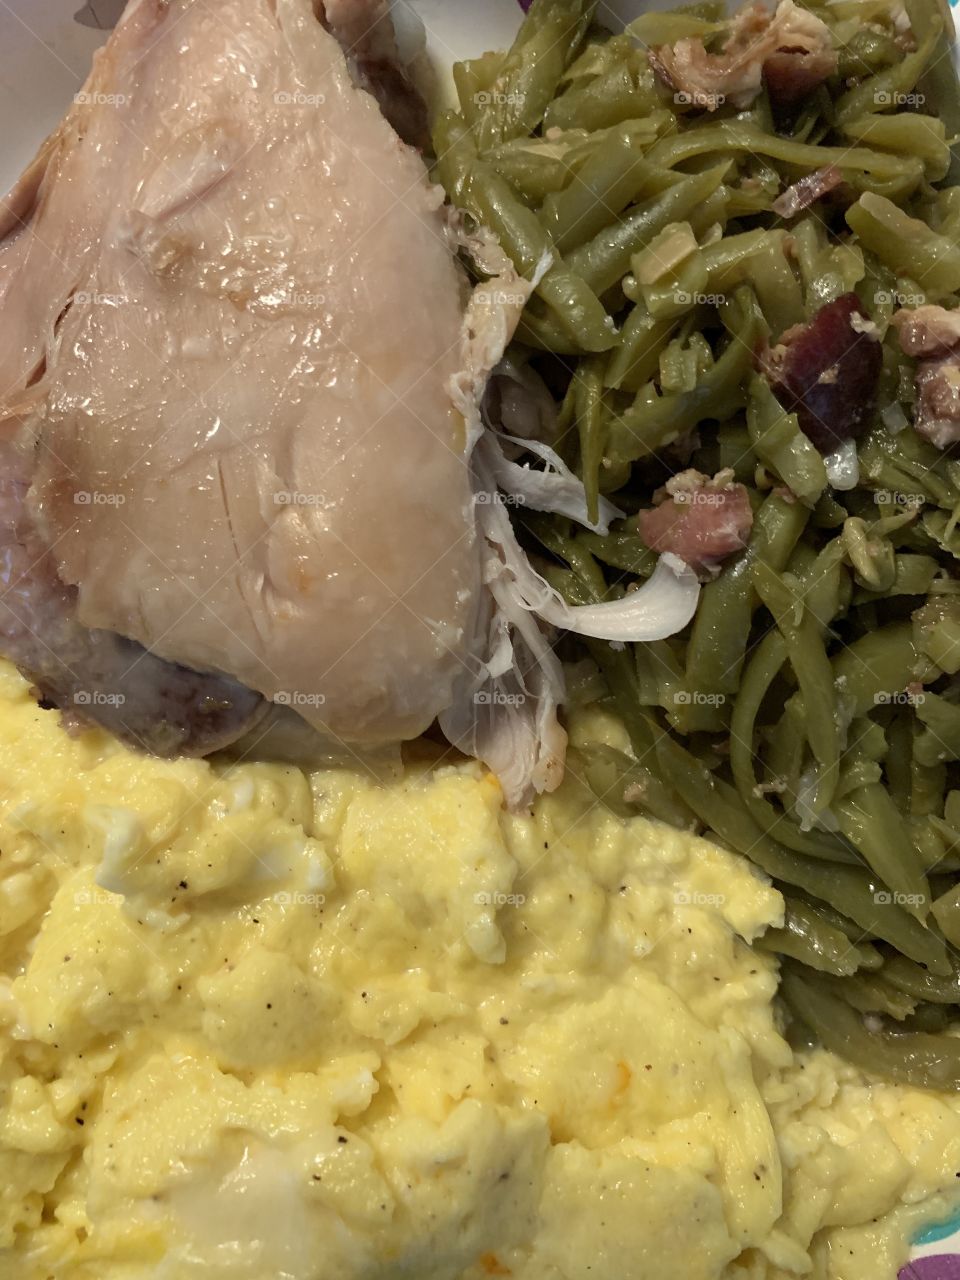 JPTSNW; Only What I’m Good At! Food, Muenster Cheesy Egg Breakfast with French style cut green beans and rotisserie skinless chicken thigh. 7 of ten